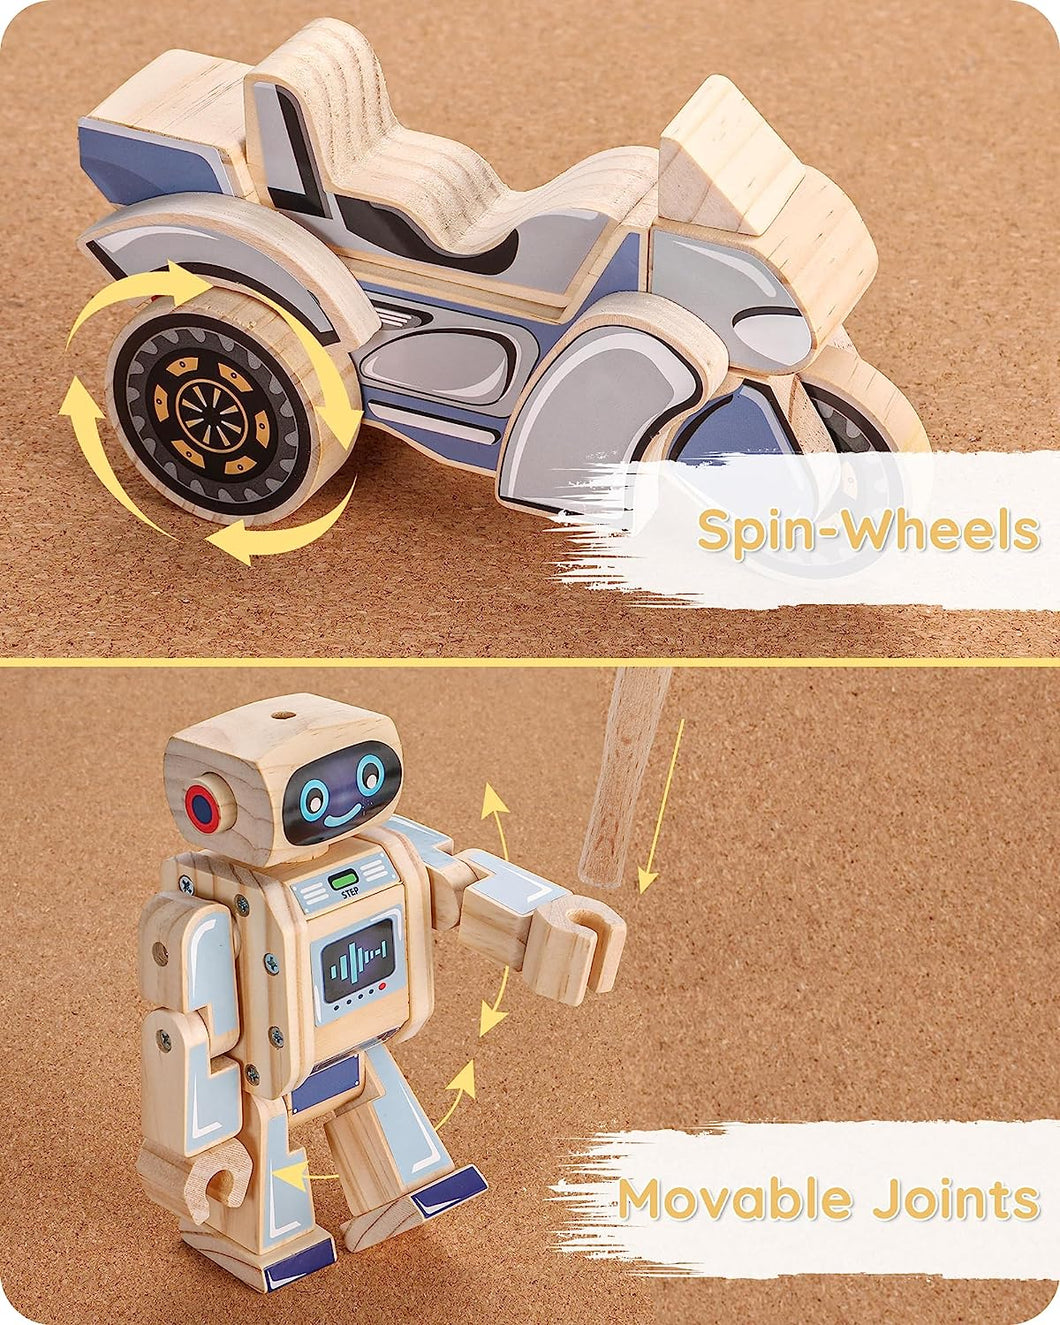 SainSmart Jr. 4-in-1 STEM Kits, Wooden Robot Assembly Toy Set, Woodworking  Crafts Projects for Kids, Gift for Boys and Girls